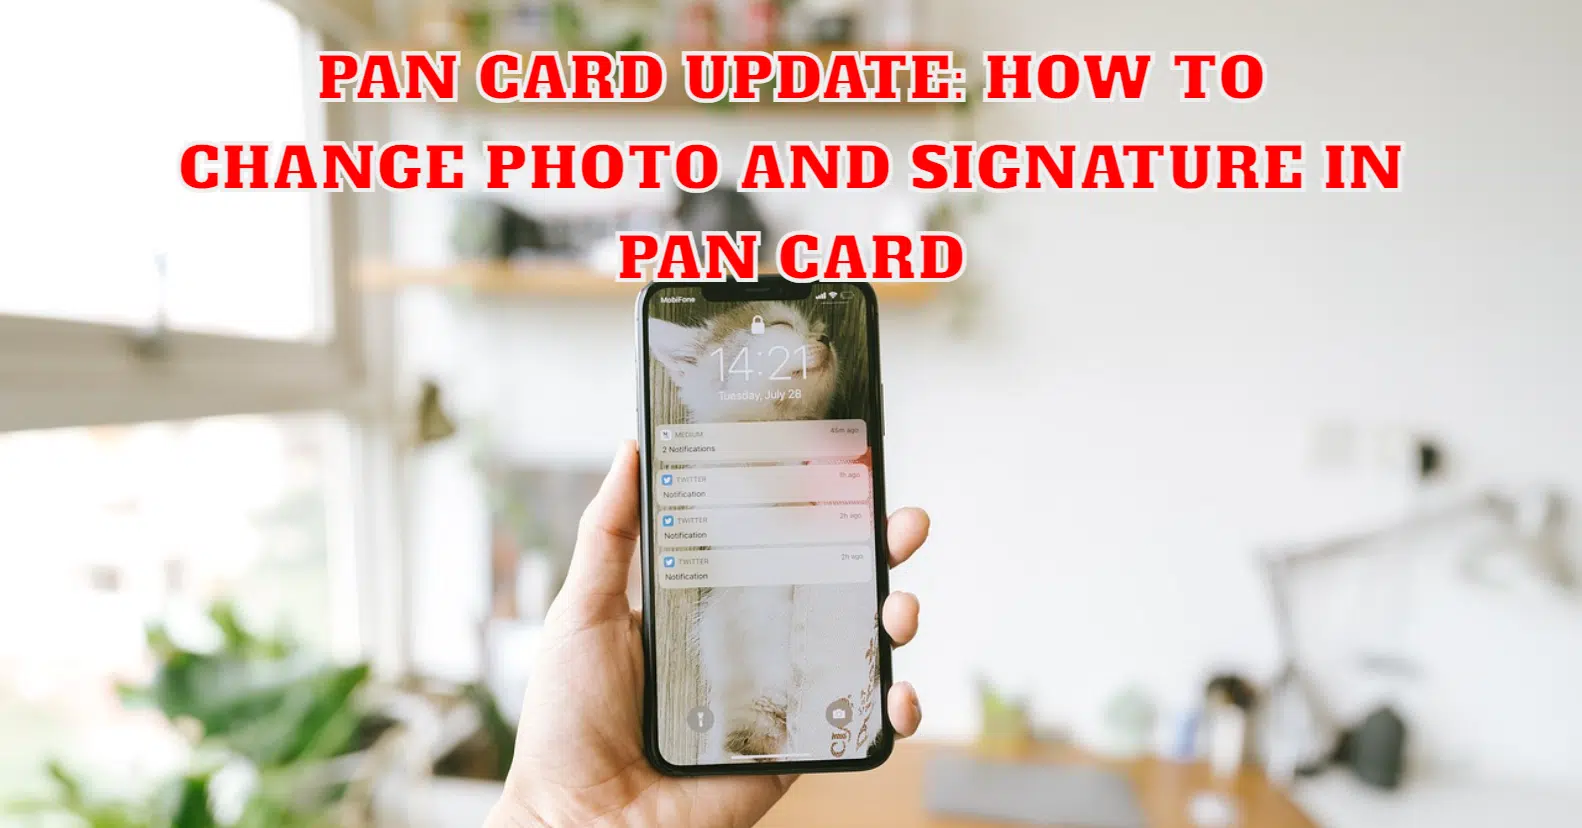 PAN Card Update: How To Change Photo And Signature In PAN Card